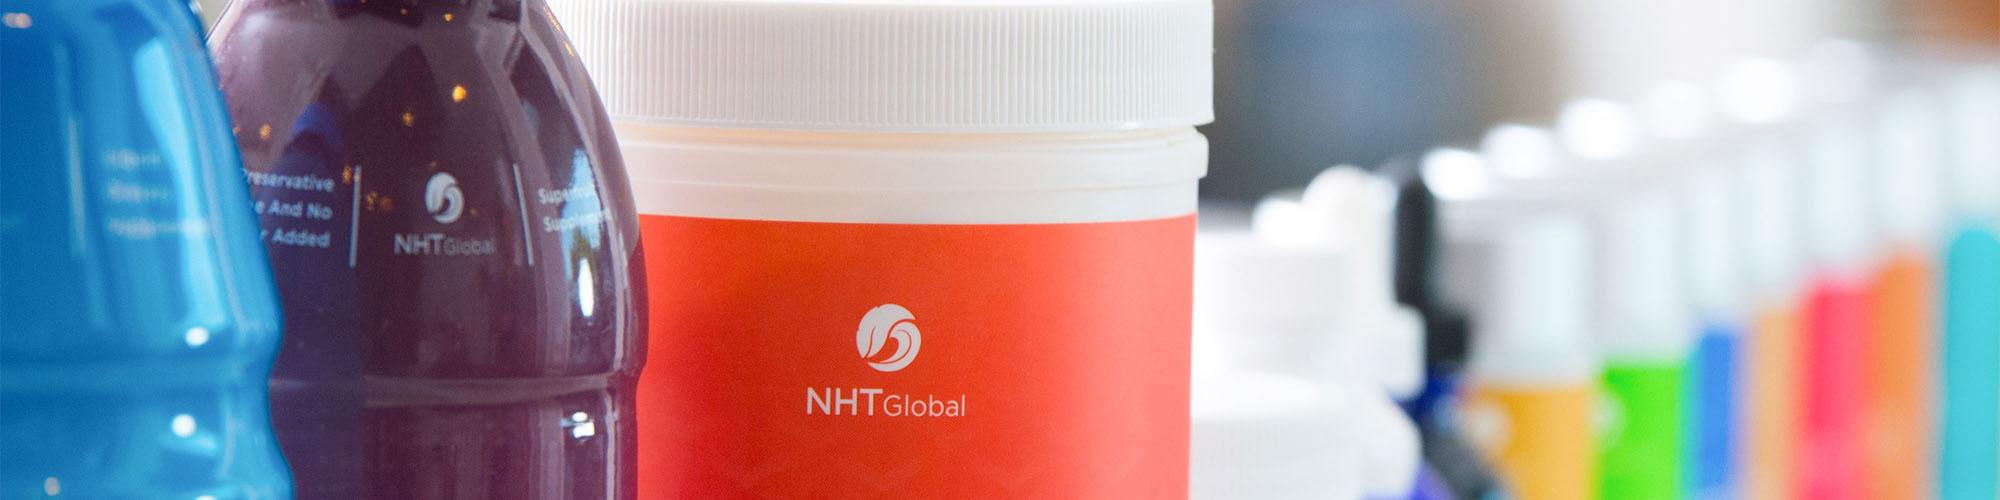 NHT Global store